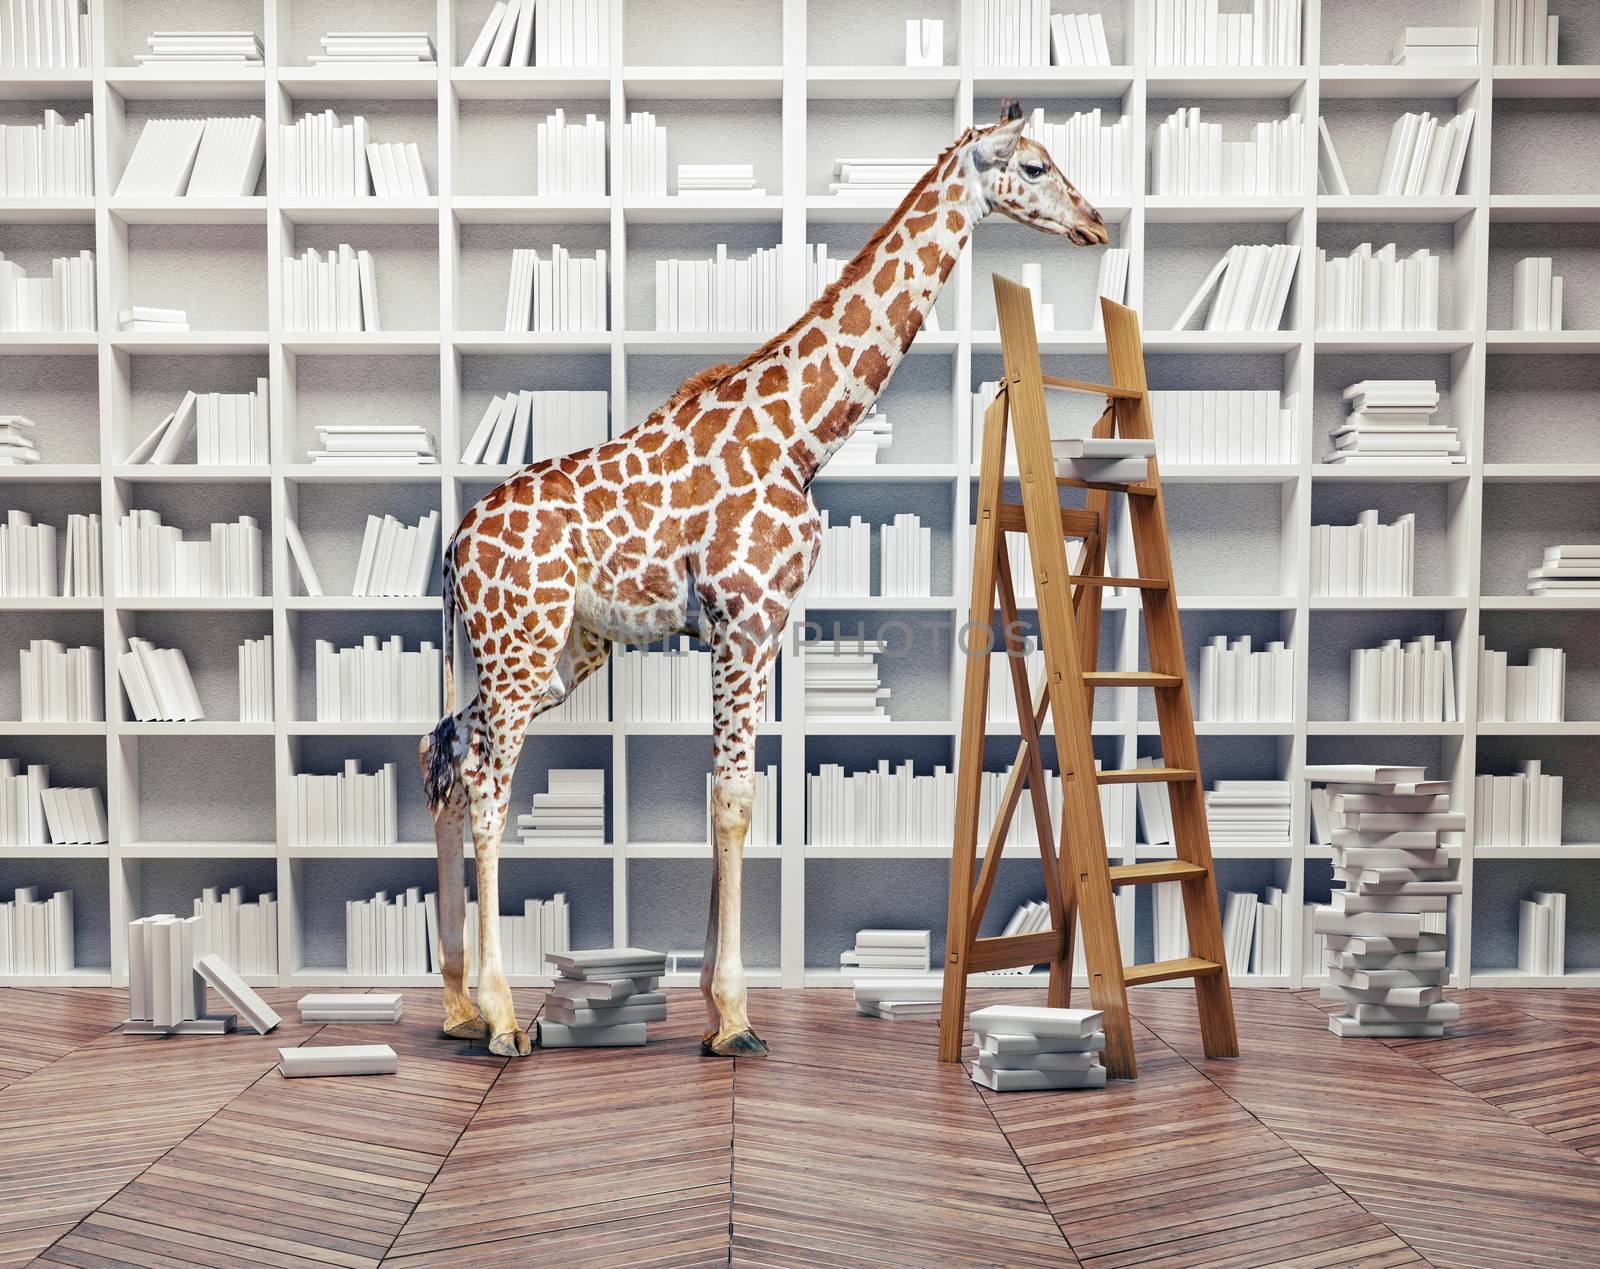 an giraffe baby  in the room with book shelves. Creative concept